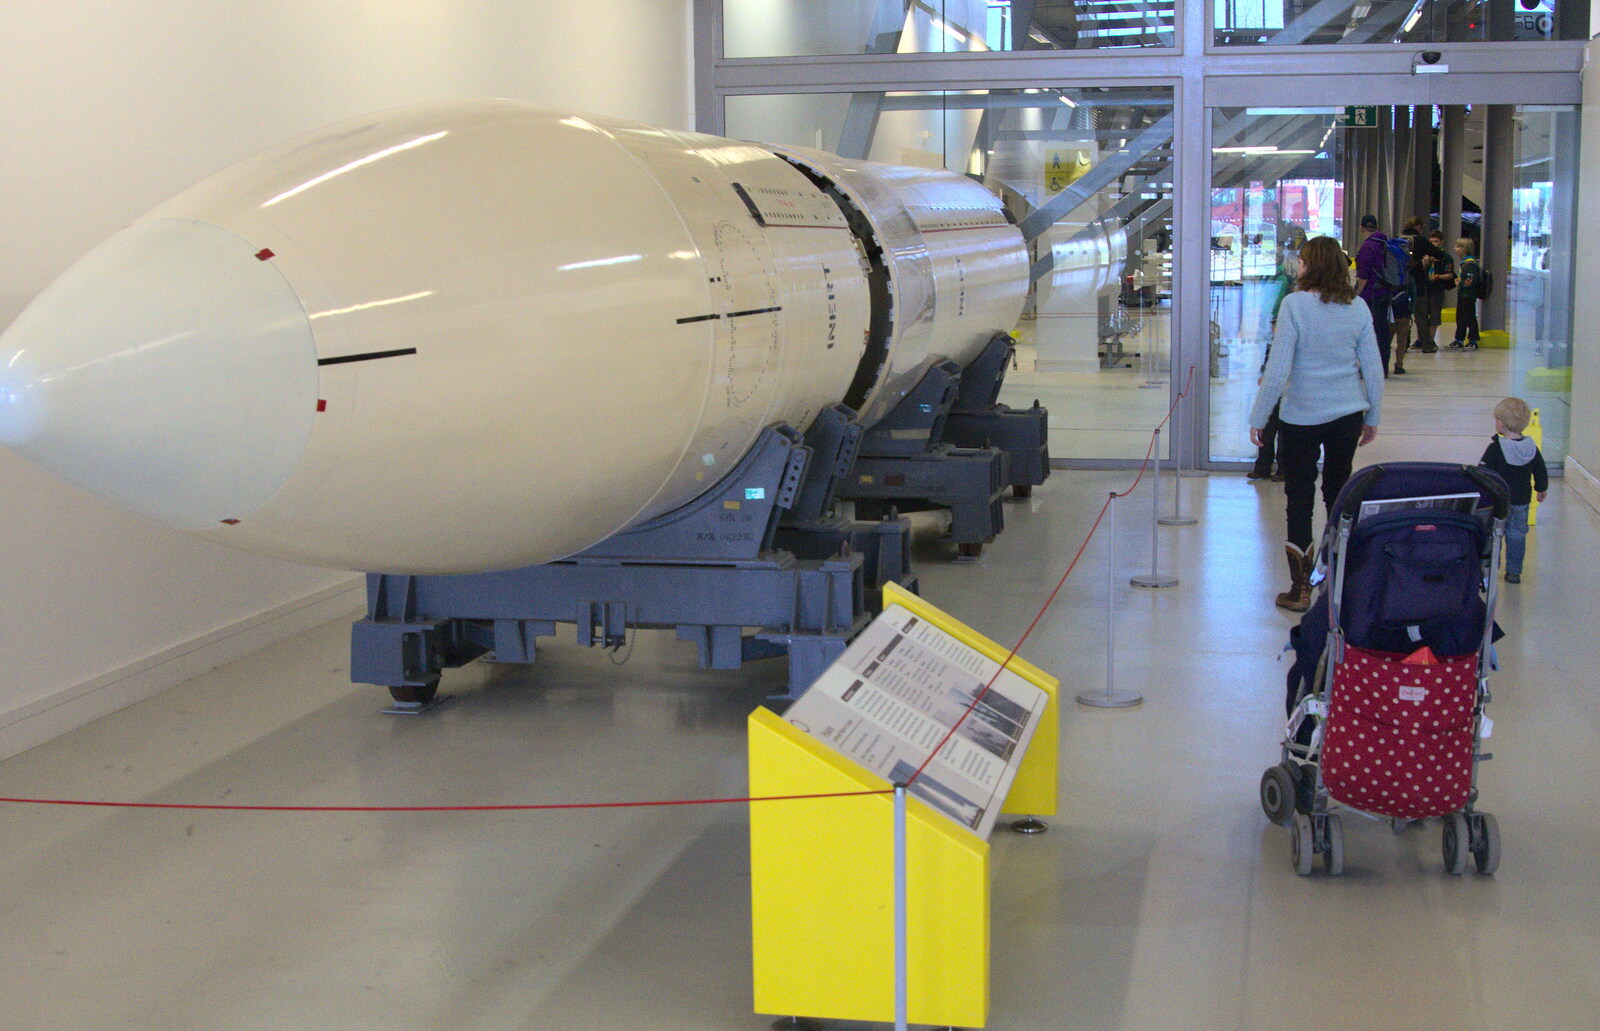 The first exhibit is a Polaris ICBM from A Day Out at Duxford, Cambridgeshire - 9th March 2014